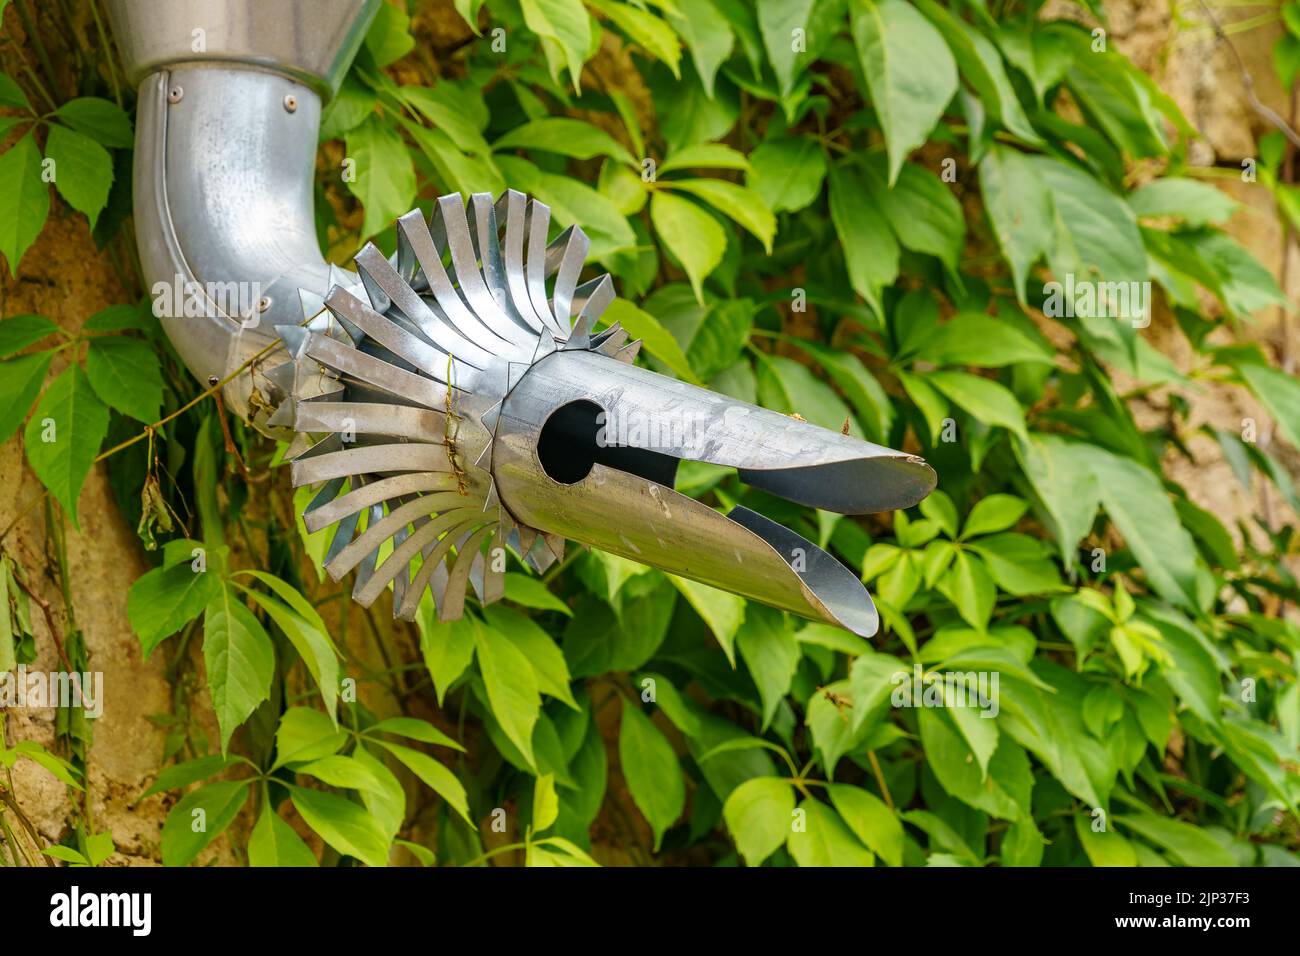 Steel drain with a strange shape that looks like a dragon on a green ivy background. Stock Photo